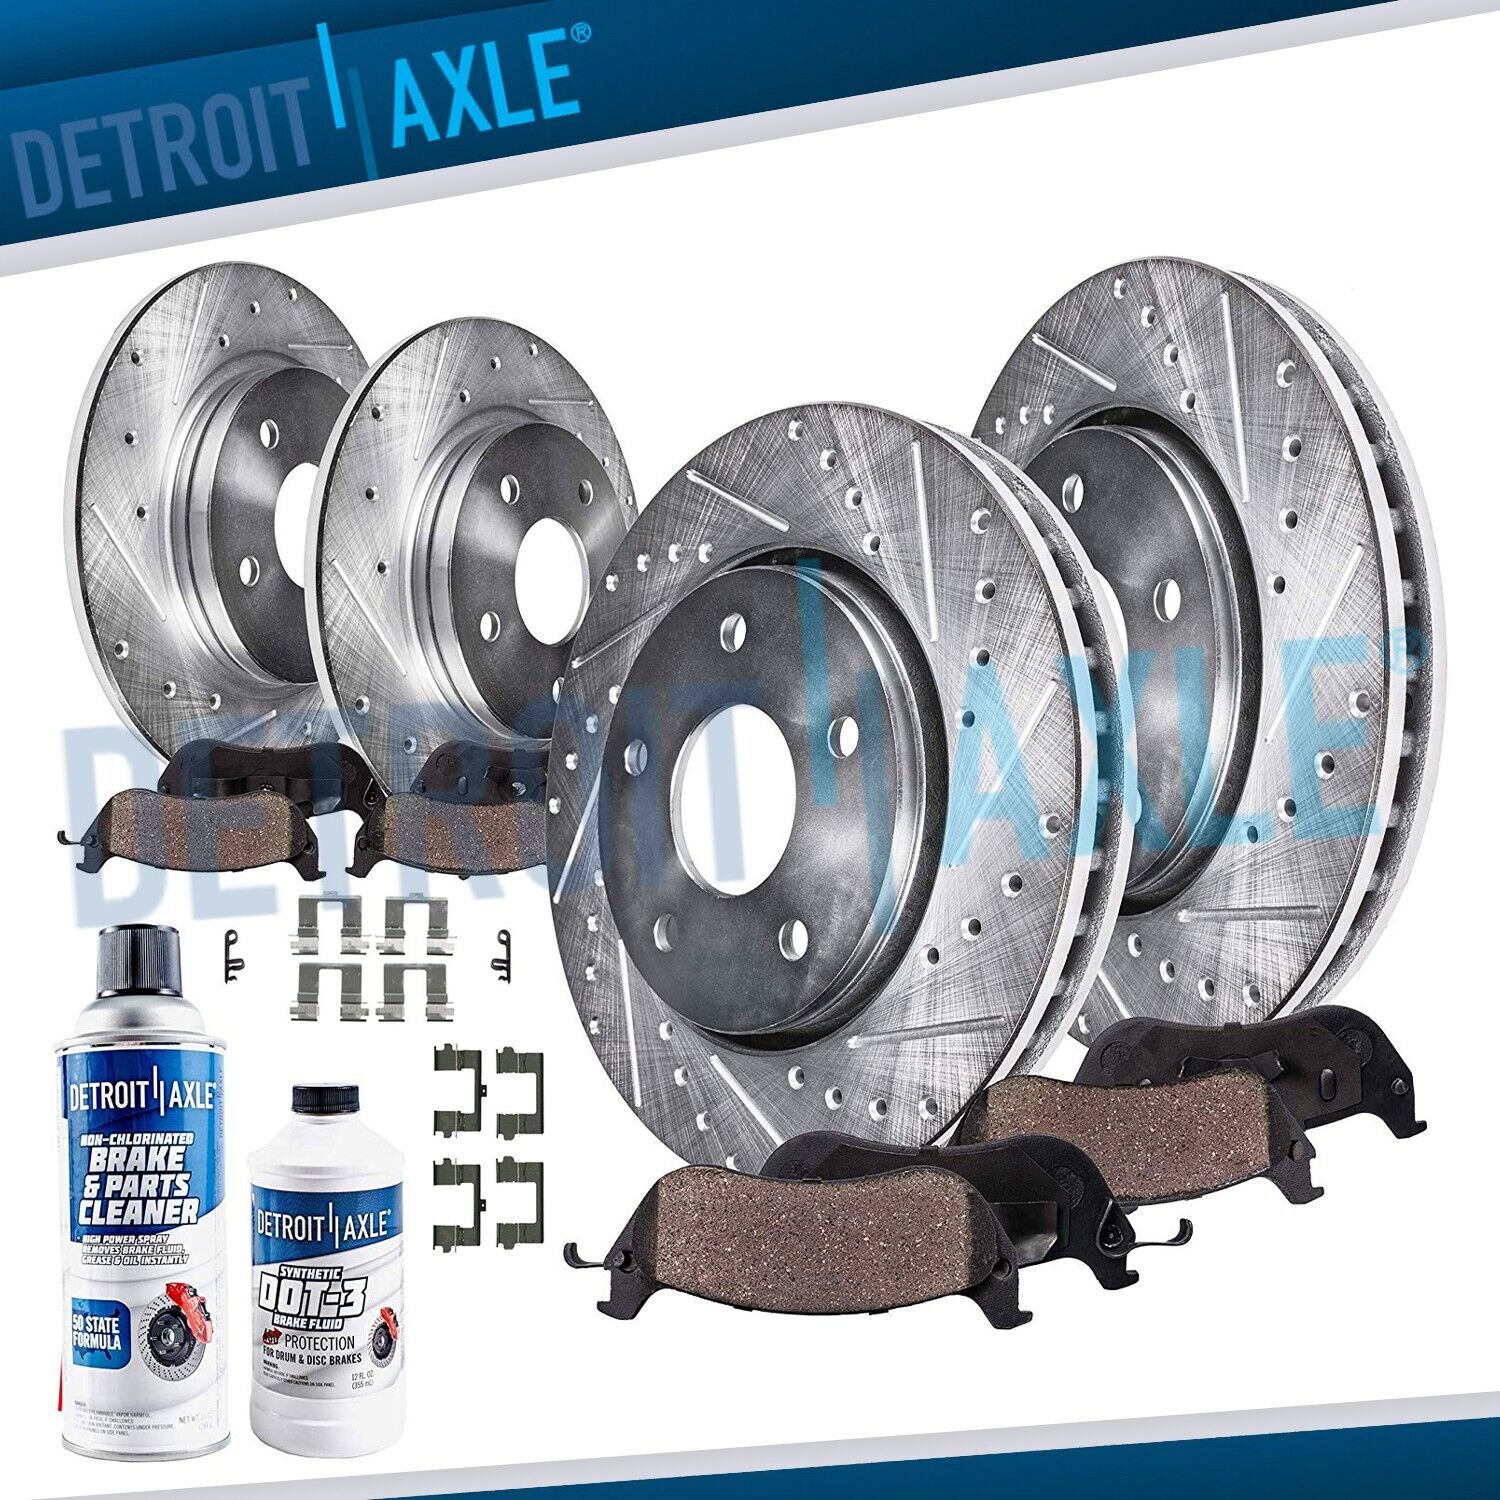 Front Rear Drilled and Slotted Rotors Brake Pads for Acura MDX ZDX Honda Pilot